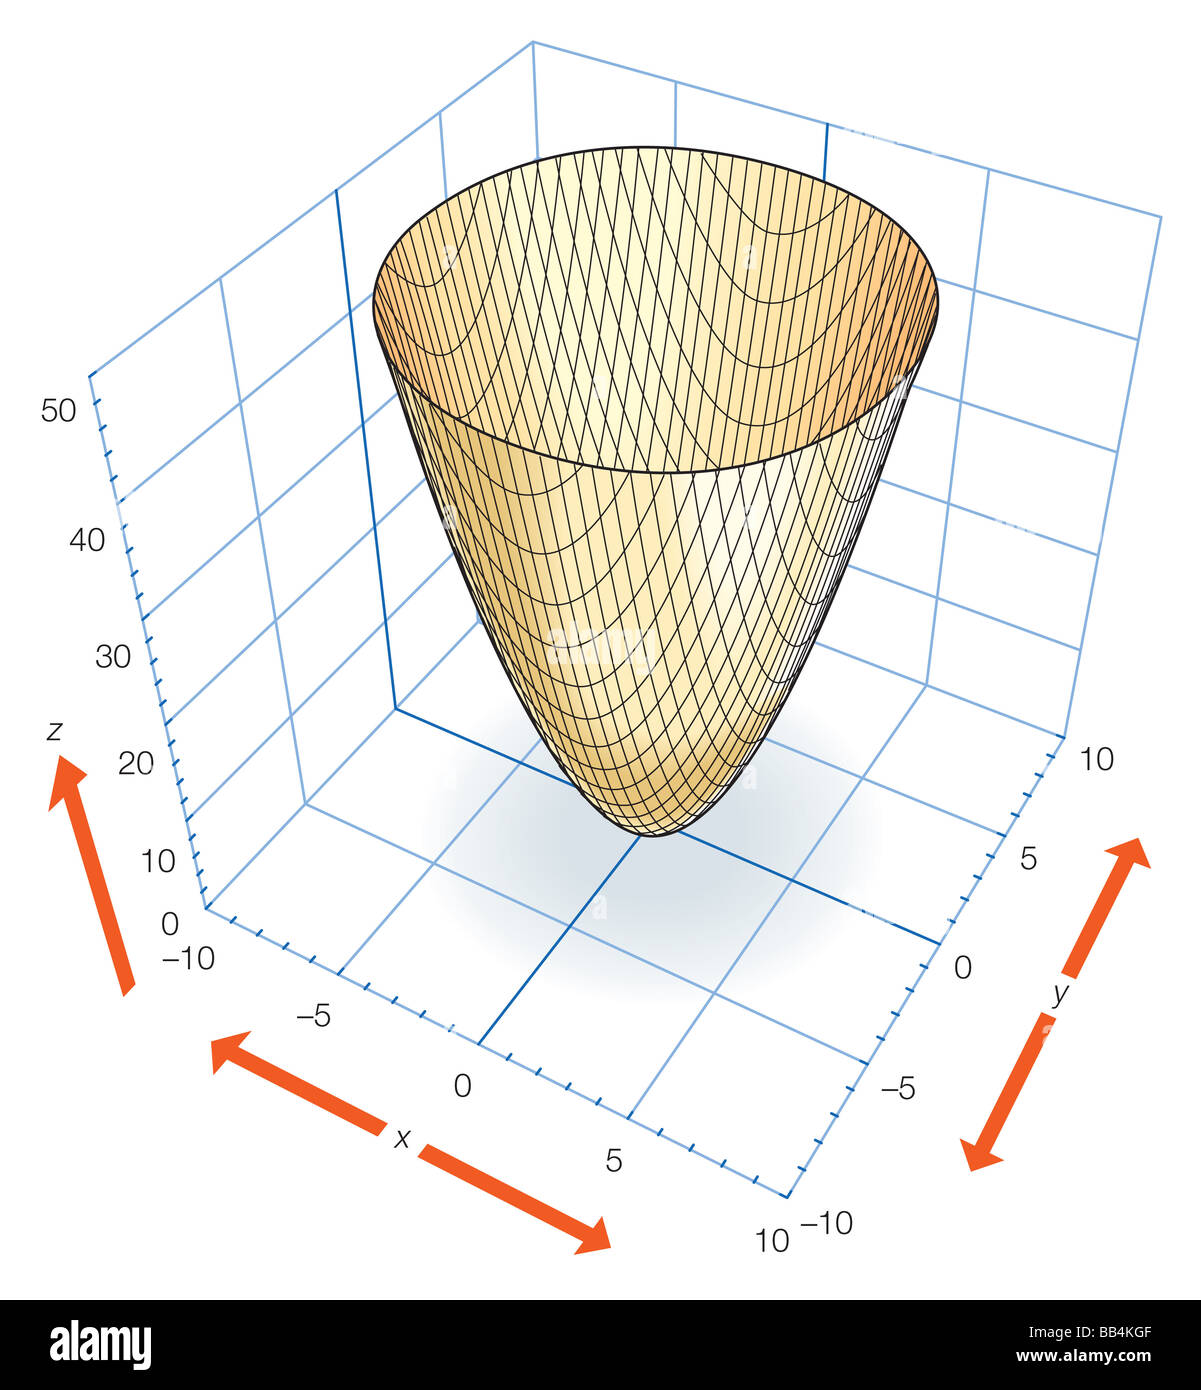 Part of the elliptic paraboloid z = x2 + y2 which can be generated by rotating the parabola z = x2 (or z = y2) about the z-axis. Stock Photo